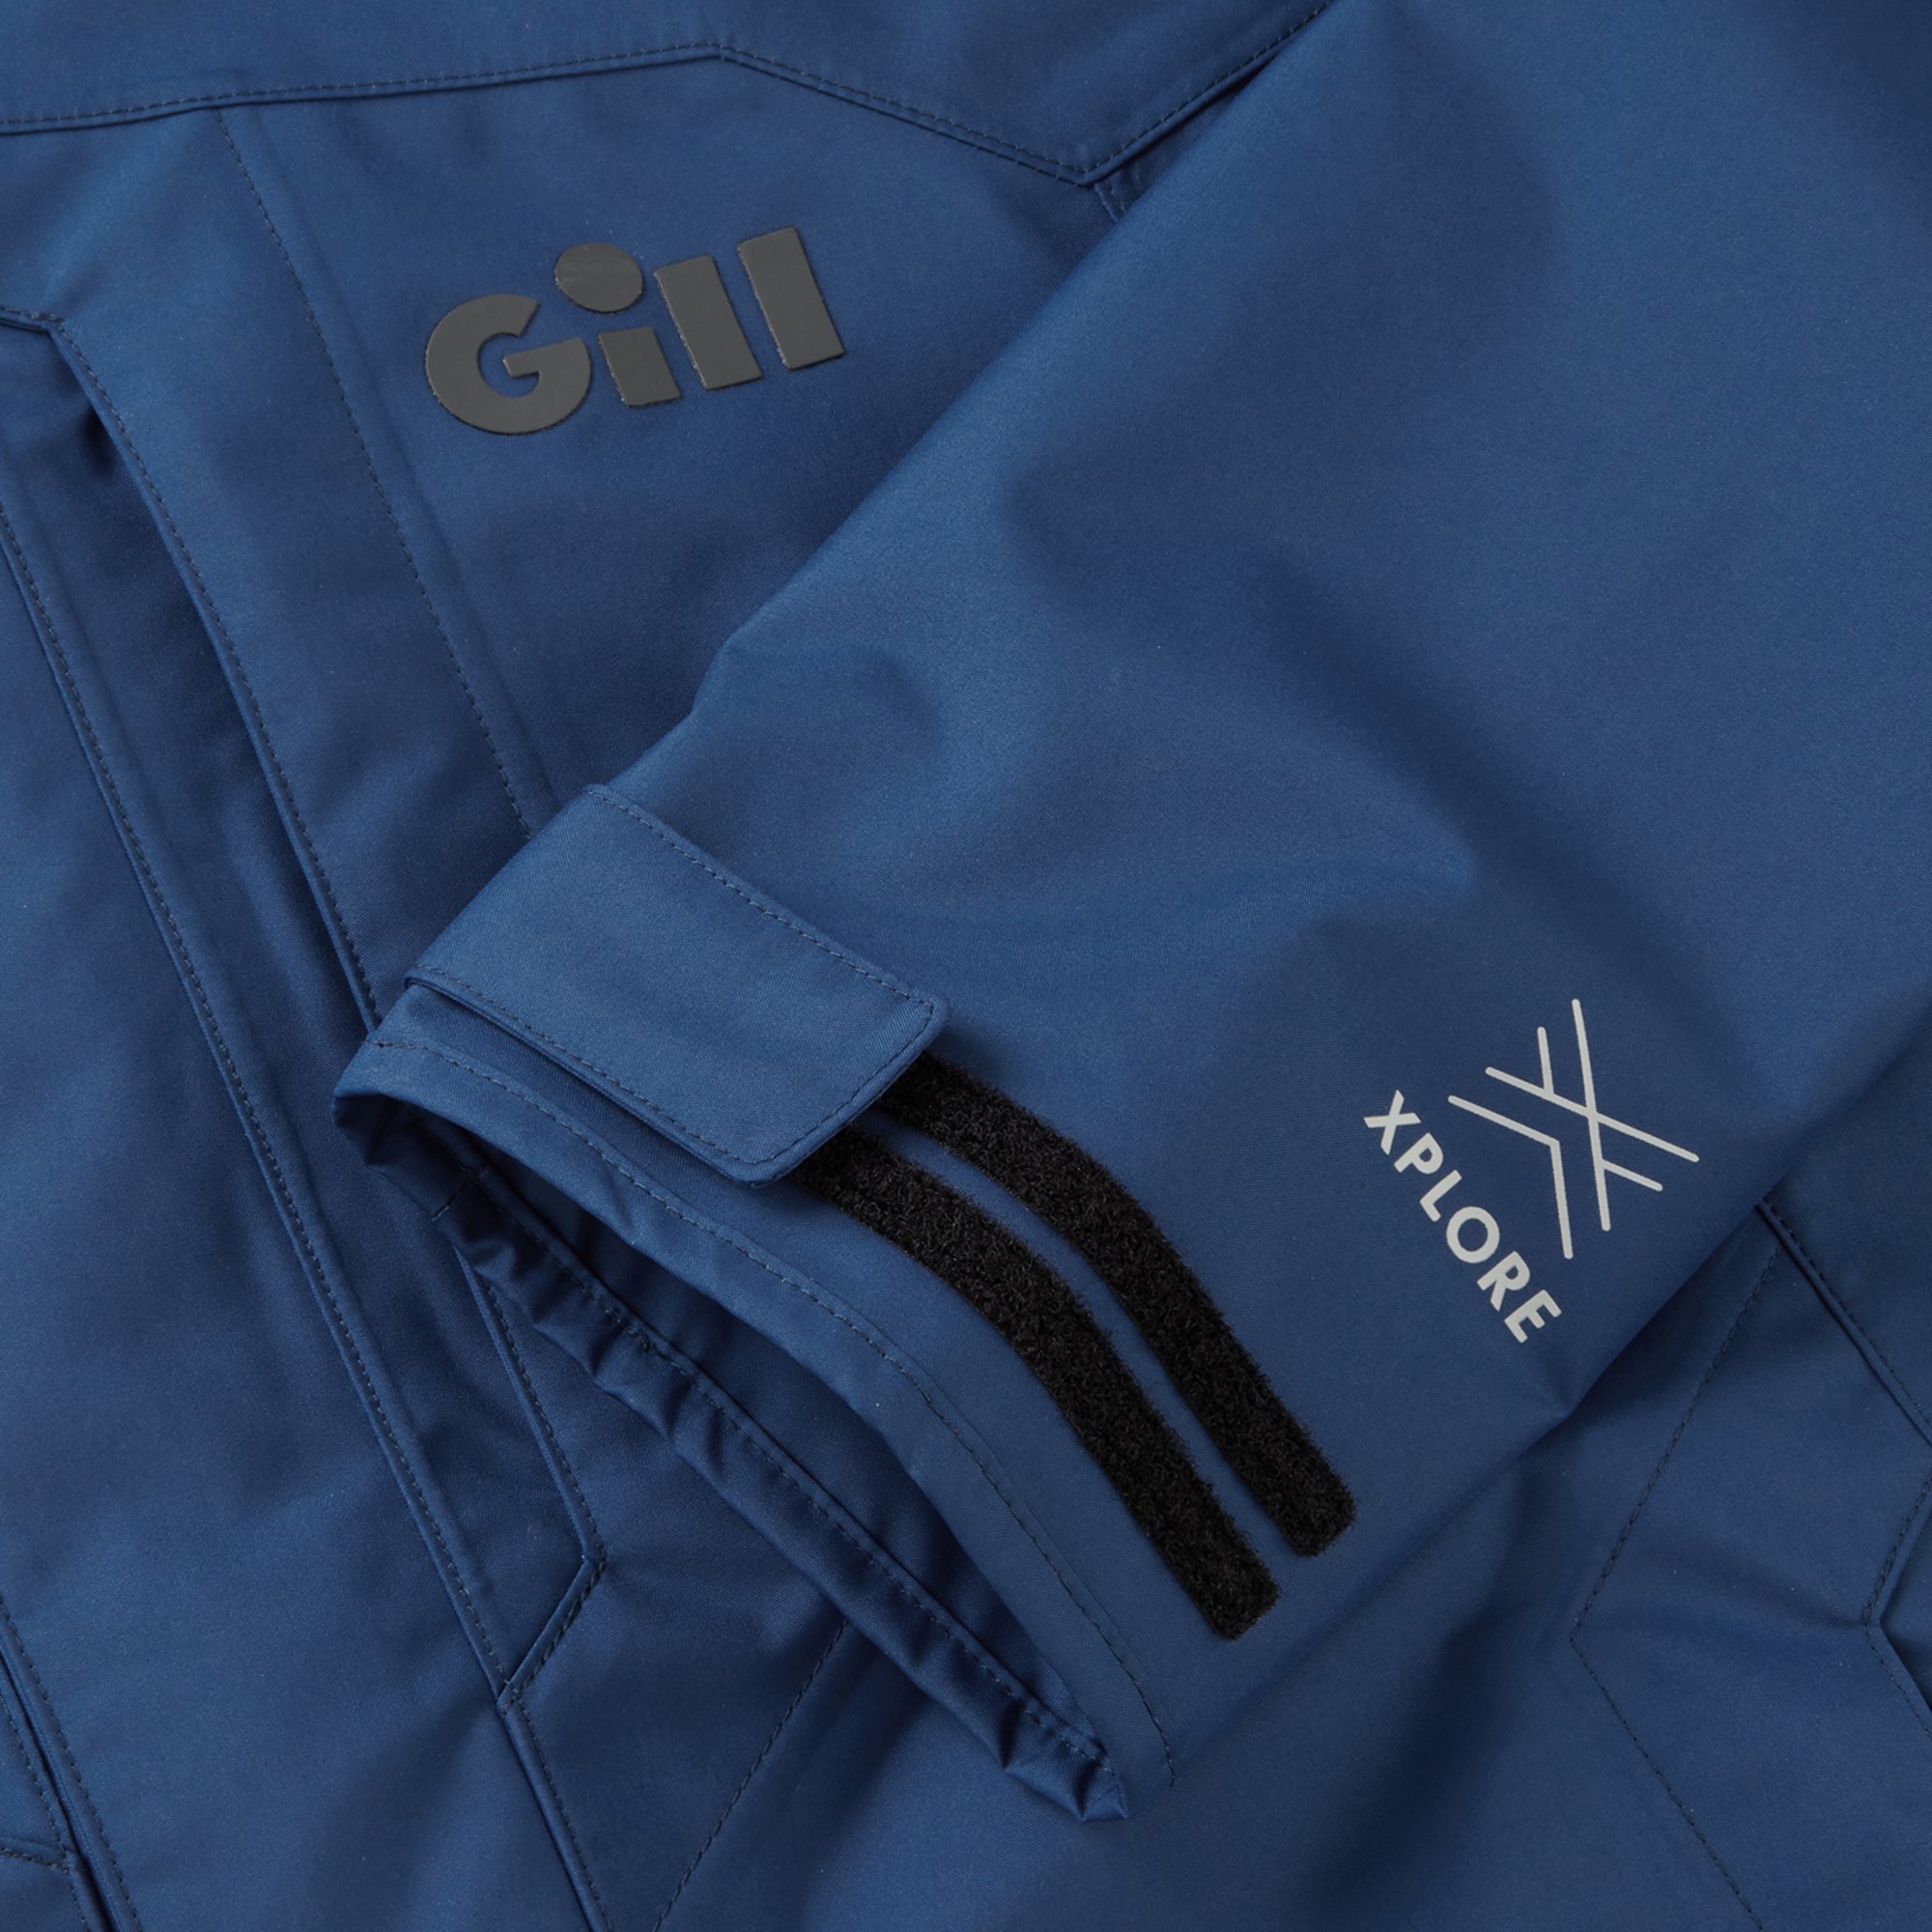 FG301J Aspect Jacket: Gill Fishing Official US Store - Technical Fishing  Apparel